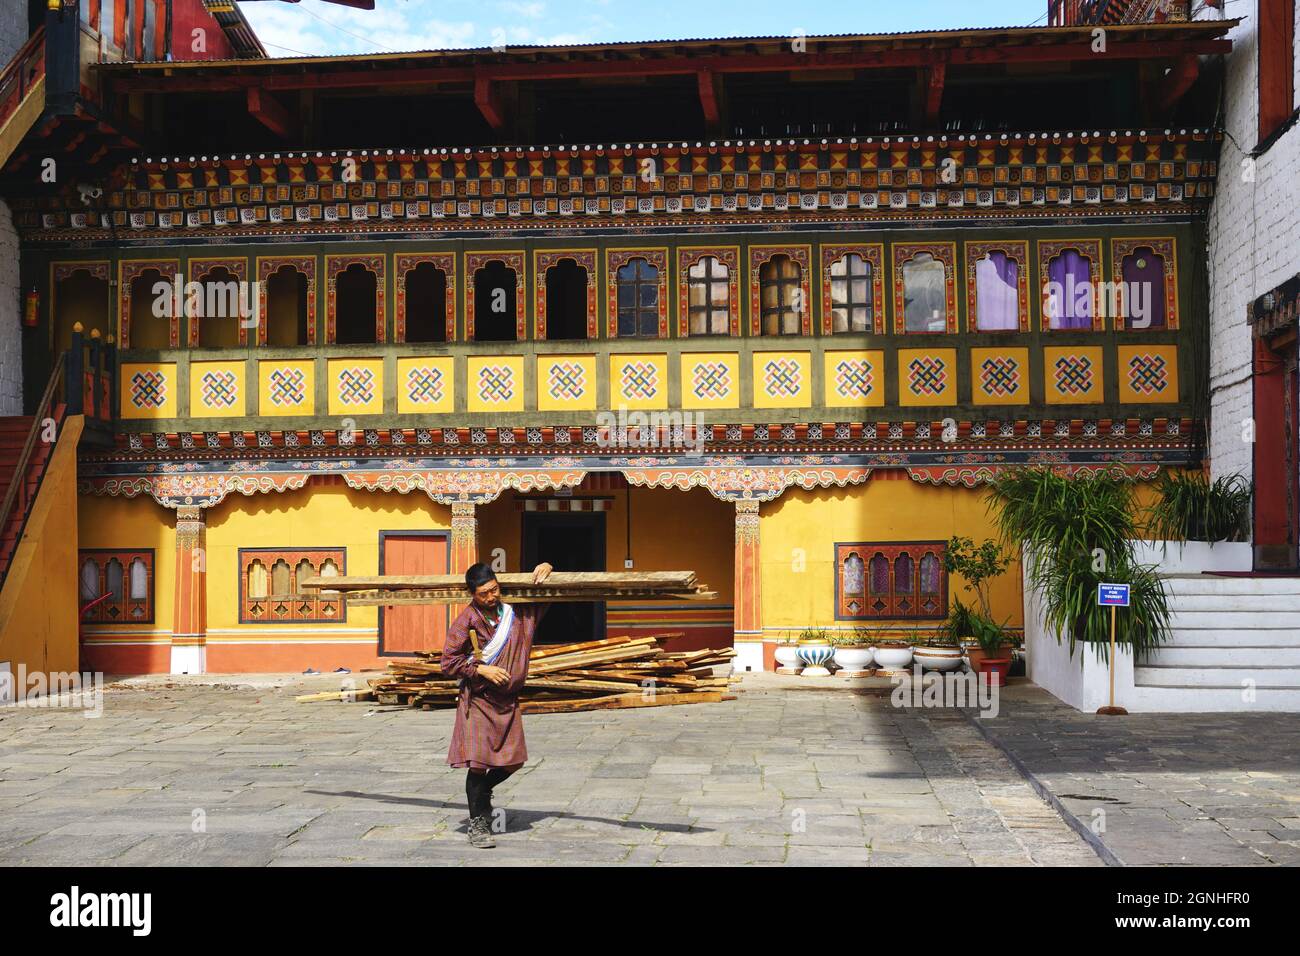 A workman wearing a traditional Bhutanese gho carries lumber past a colorful painted building on the grounds of Tashichho Dzong in Thimphu, Bhutan. Stock Photo